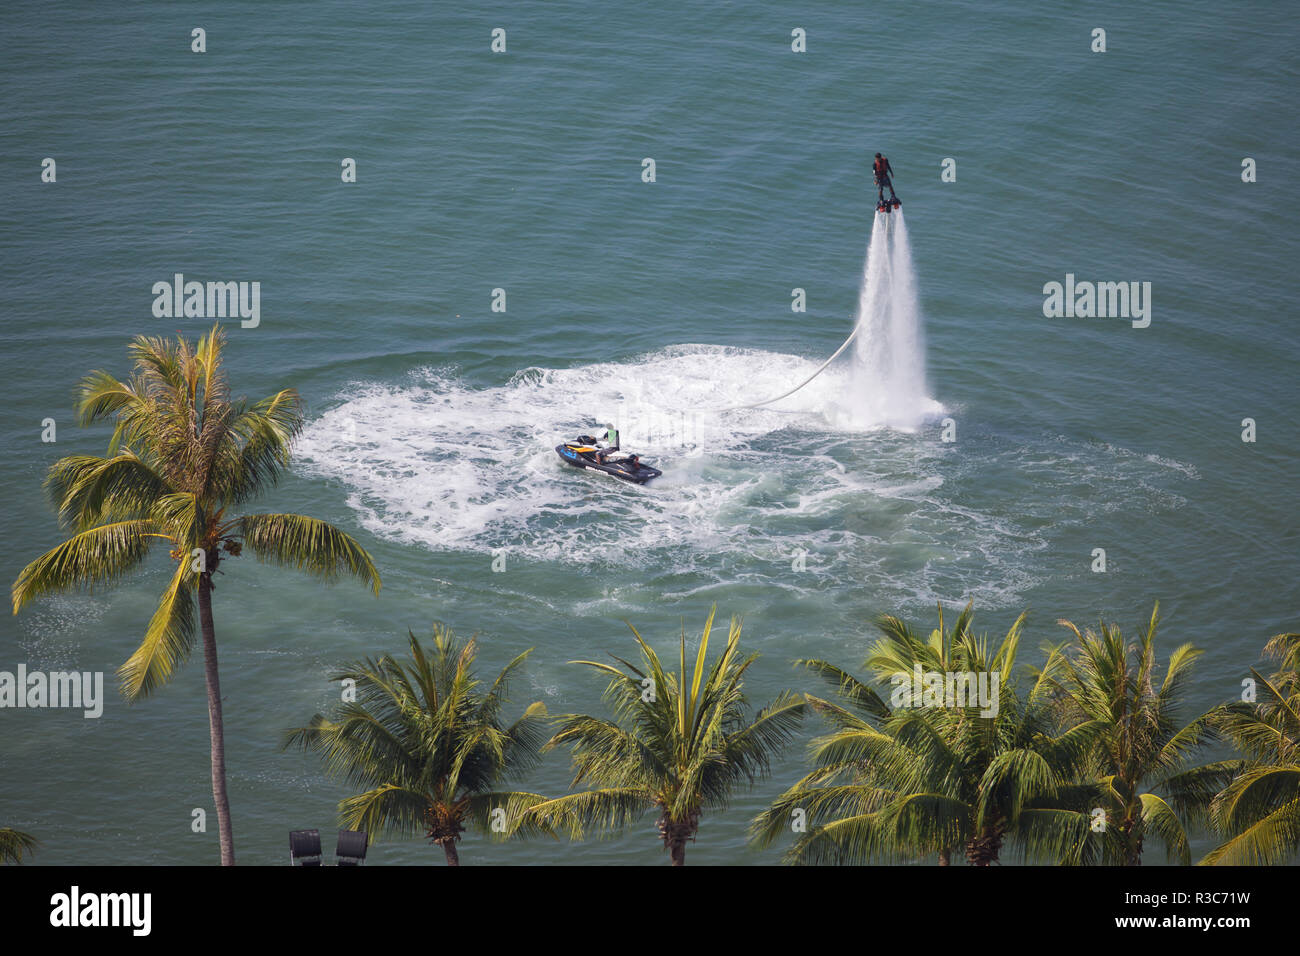 A water jet powered board in Pattaya, Thailand Stock Photo